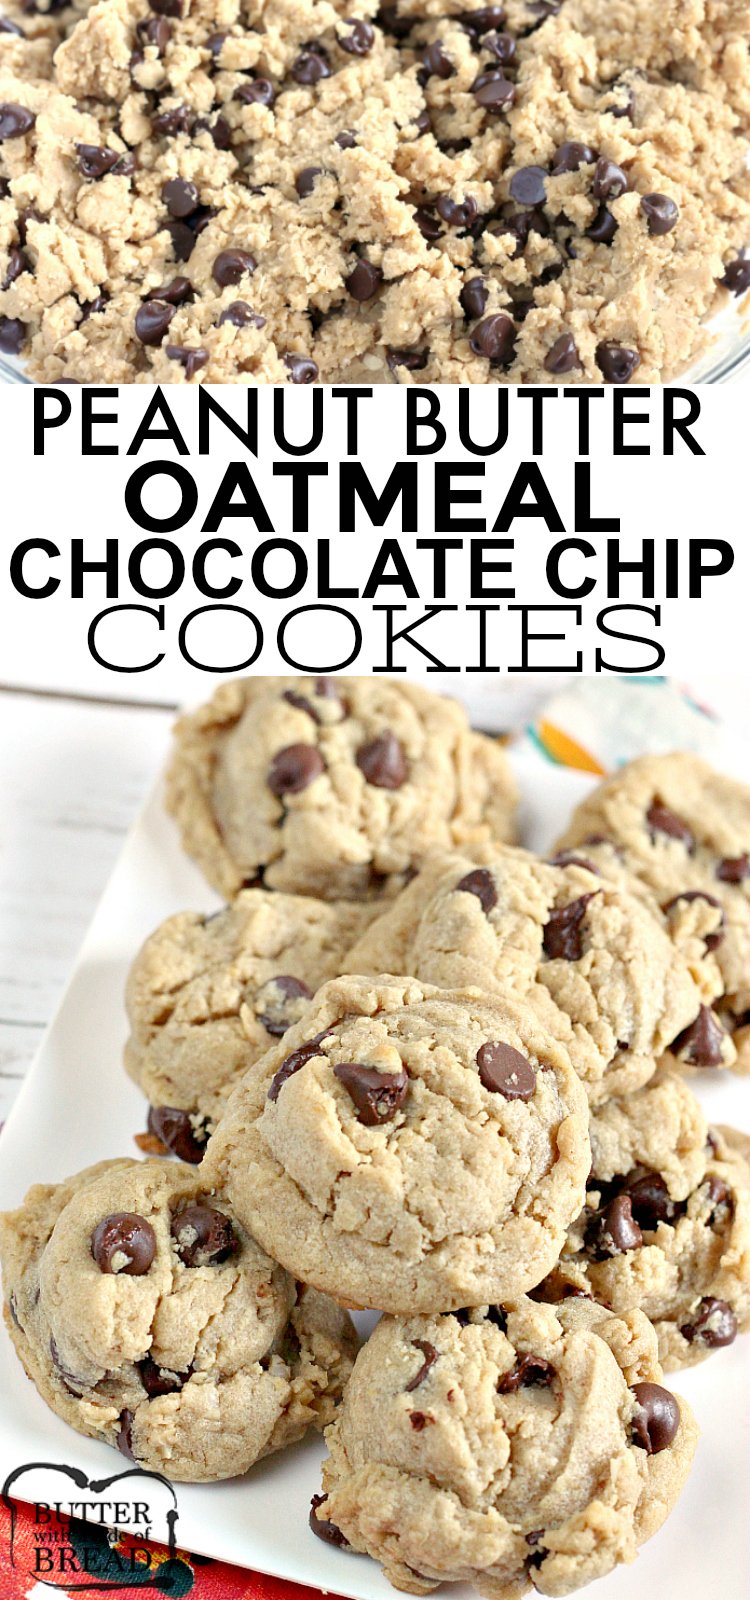 Peanut Butter Oatmeal Chocolate Chip Cookies are all three of my favorite cookie recipes put together! These thick, chewy cookies are the perfect recipe when you just can't decide what kind of cookie you want to bake!